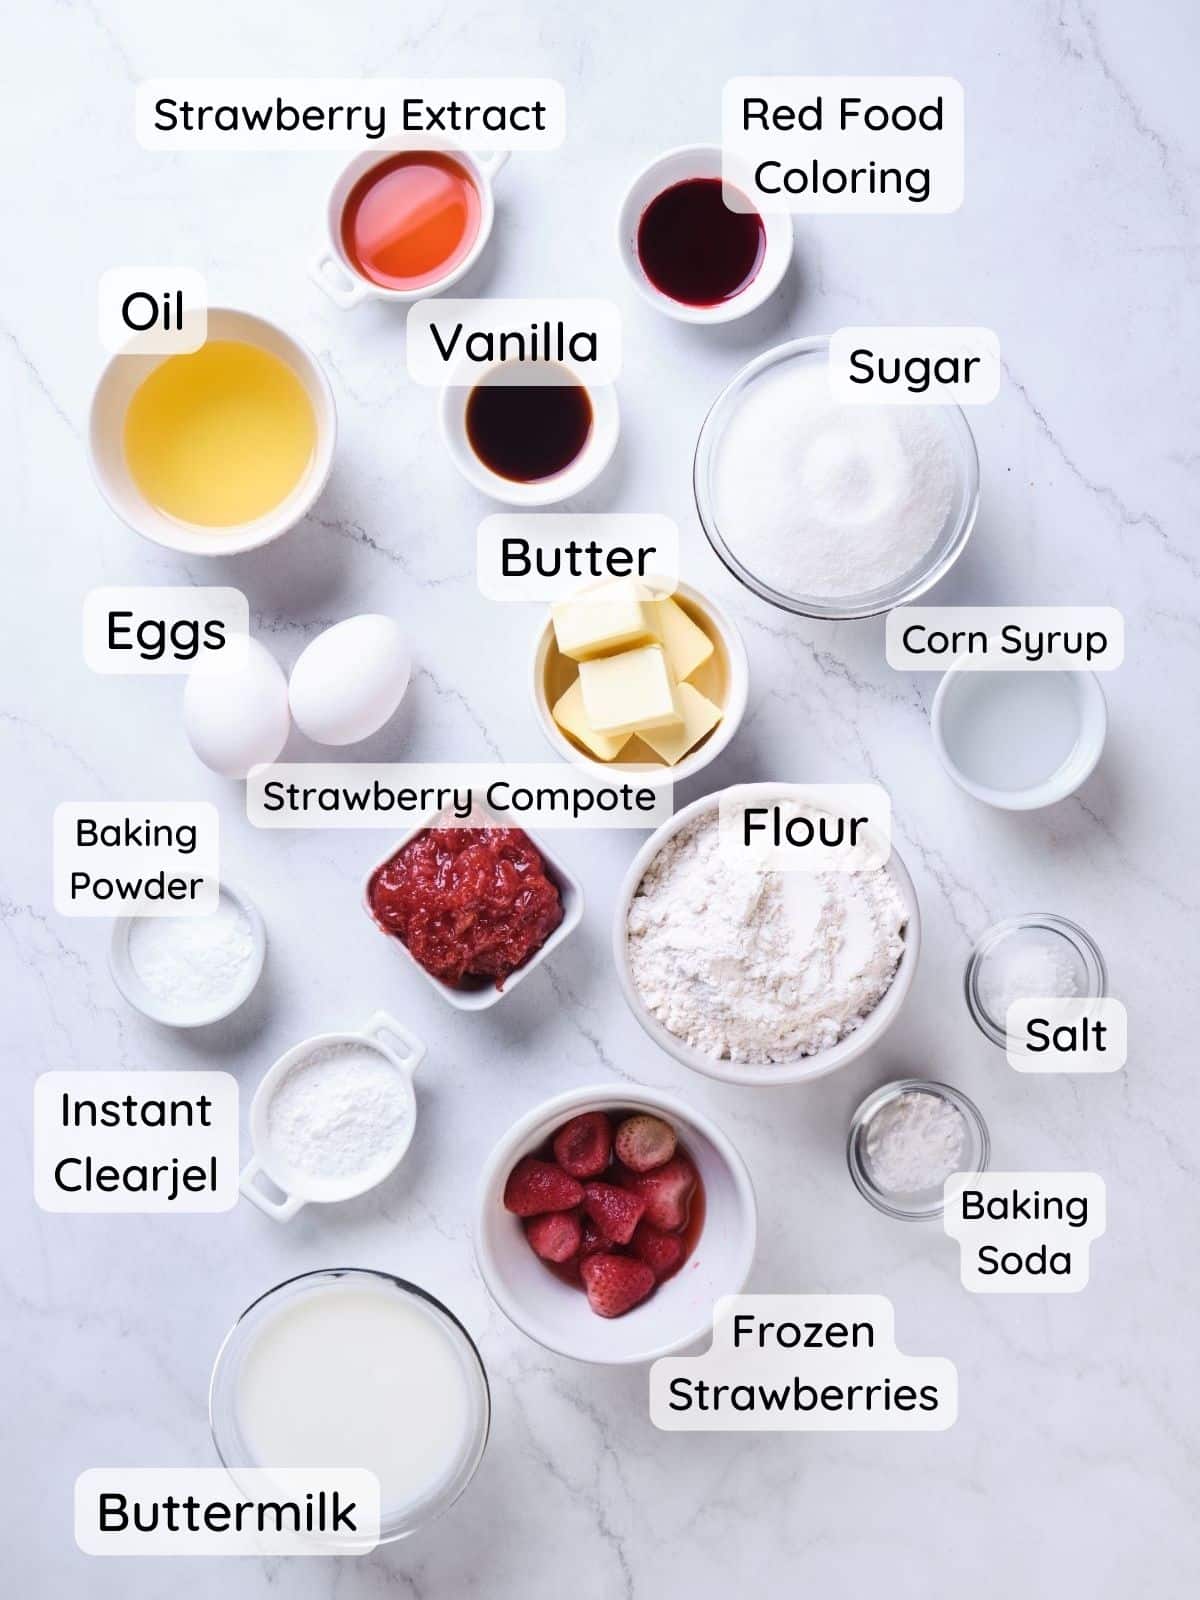 An overhead shot of the strawberry cake ingredients, with the text "flour, sugar, baking powder, baking soda, salt, instant clearjel, frozen strawberries, strawberry compote, eggs, buttermilk, oil, strawberry extract, vanilla, corn syrup, butter, red food coloring."